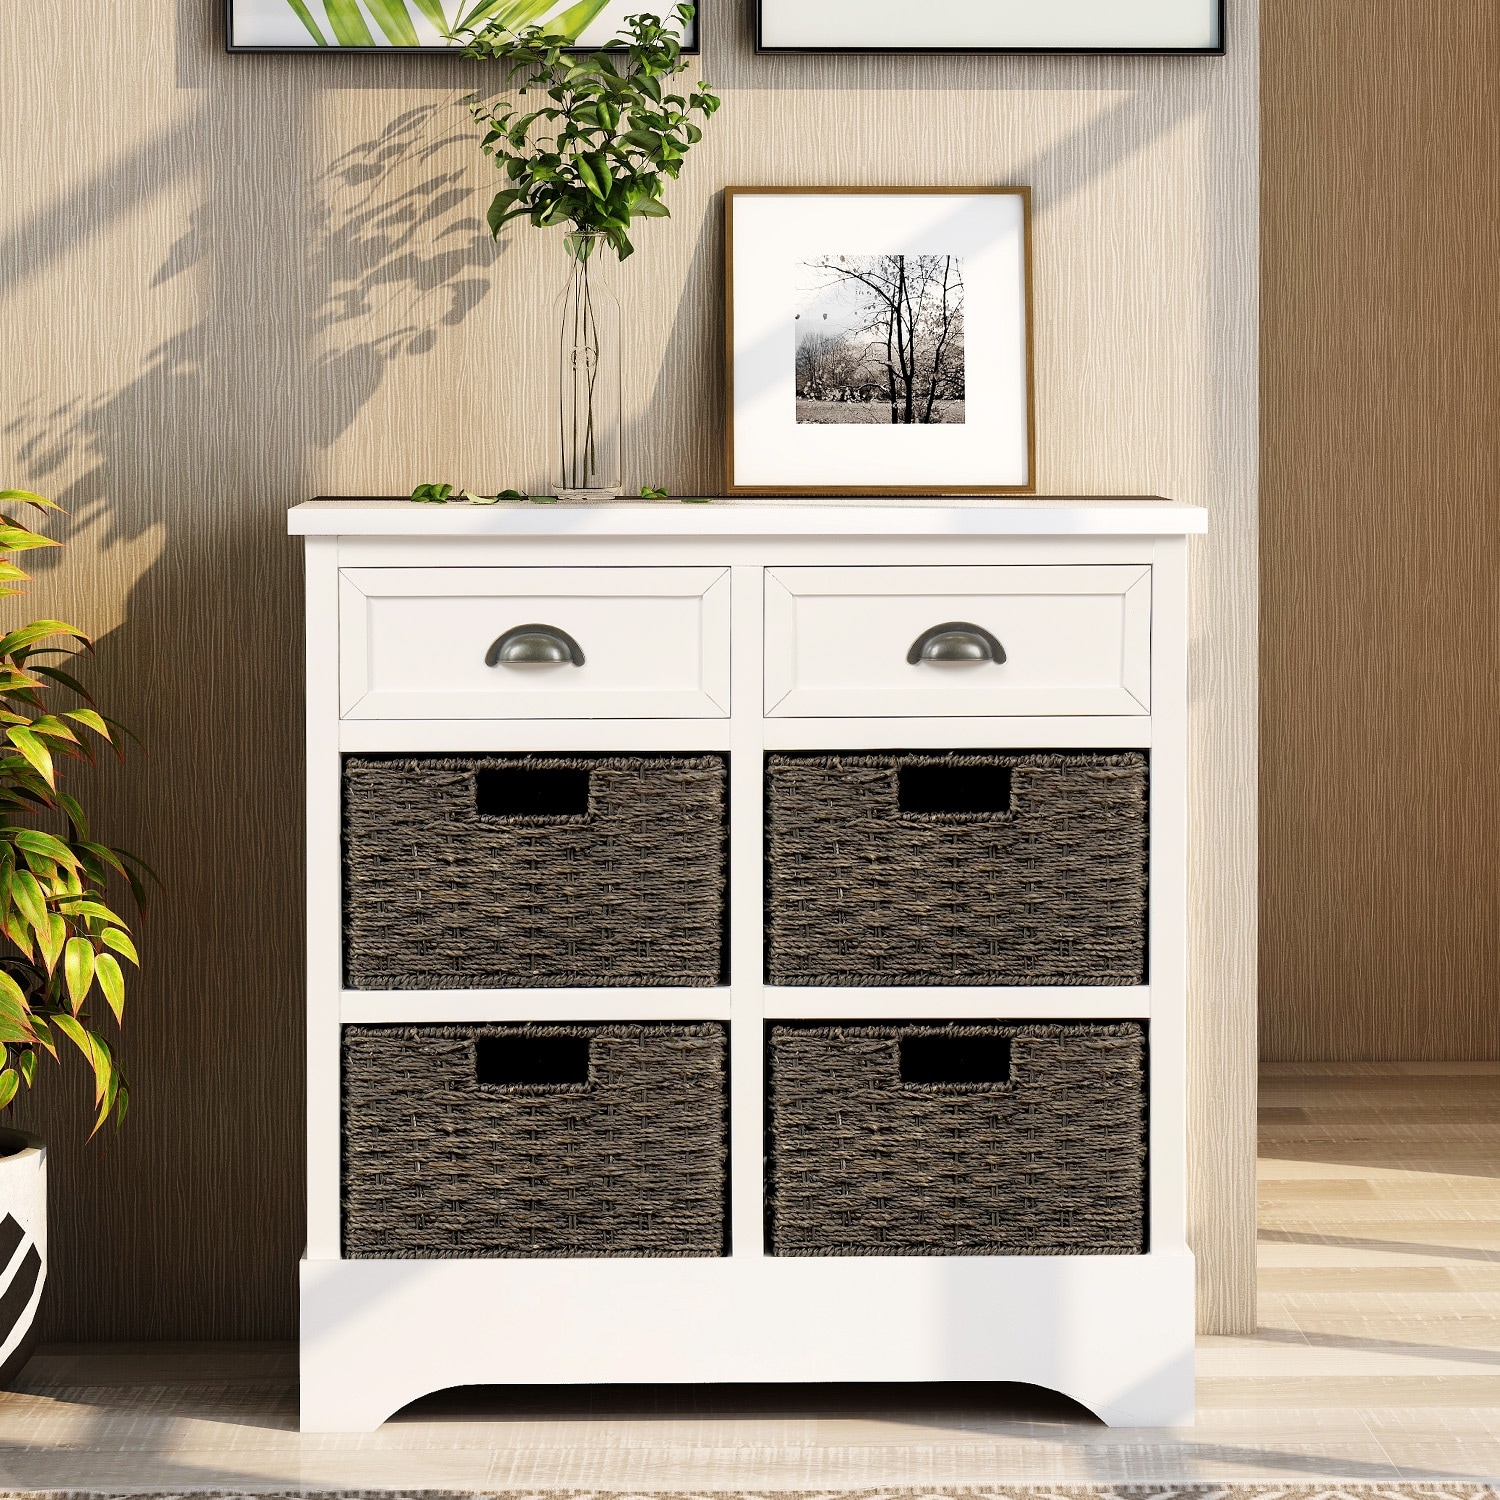 https://ak1.ostkcdn.com/images/products/is/images/direct/911406151ffdea8bc123244d403c88e73aa6216a/Rustic-Storage-Cabinet-with-Two-Drawers-and-Four-Classic-Rattan-Basket.jpg